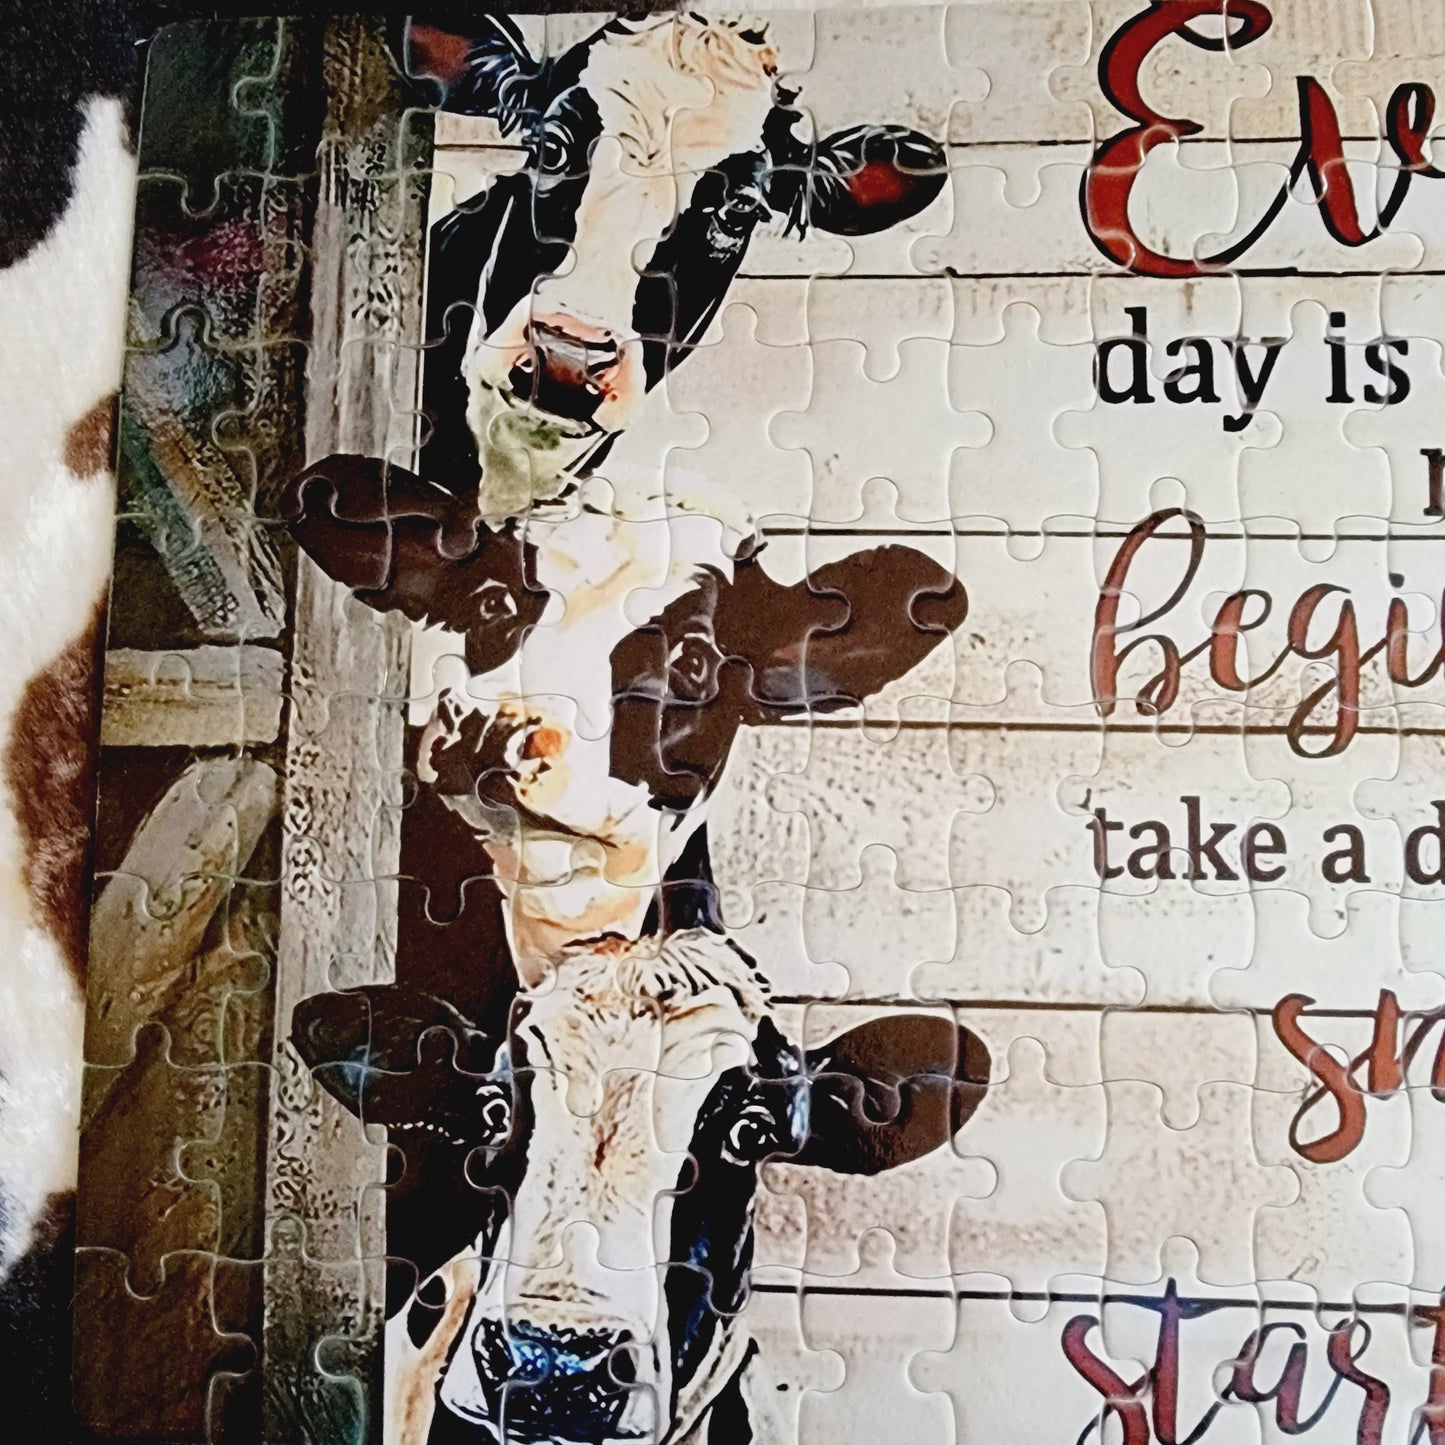 Everyday Is A New Beginning Cow 120 Piece Handmade Jigsaw Puzzle